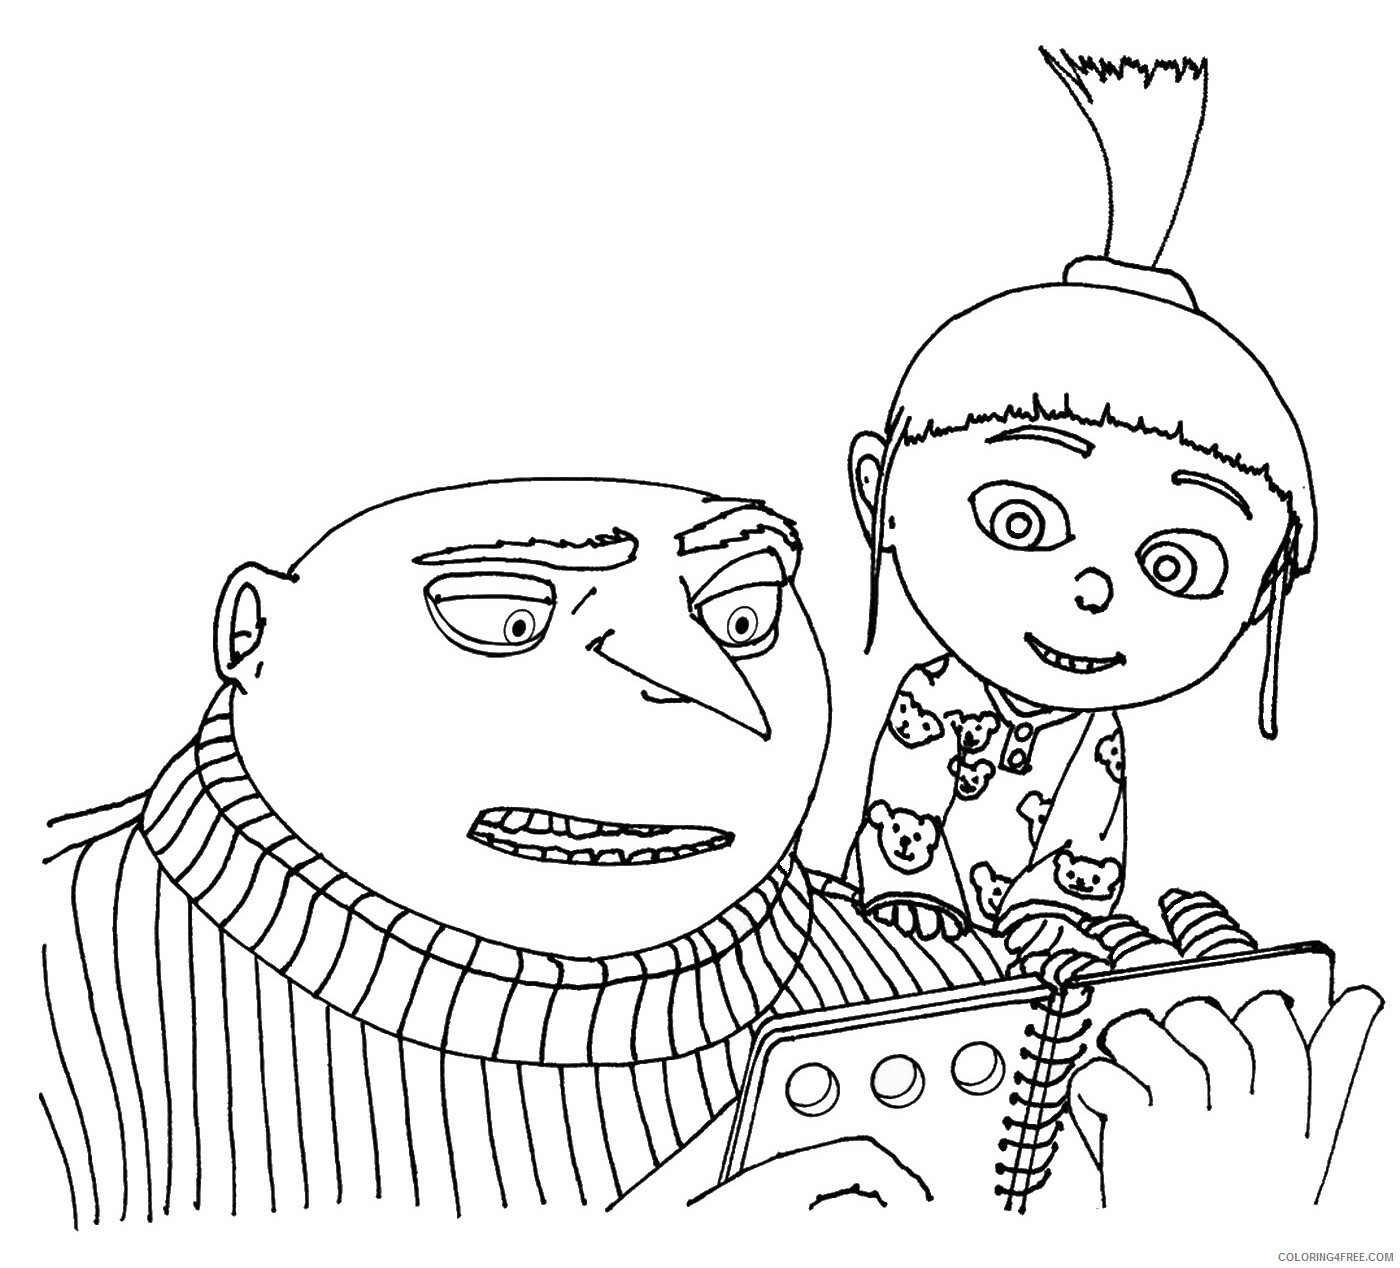 Despicable Me Coloring Pages TV Film despicable_me_cl_08 Printable 2020 02473 Coloring4free